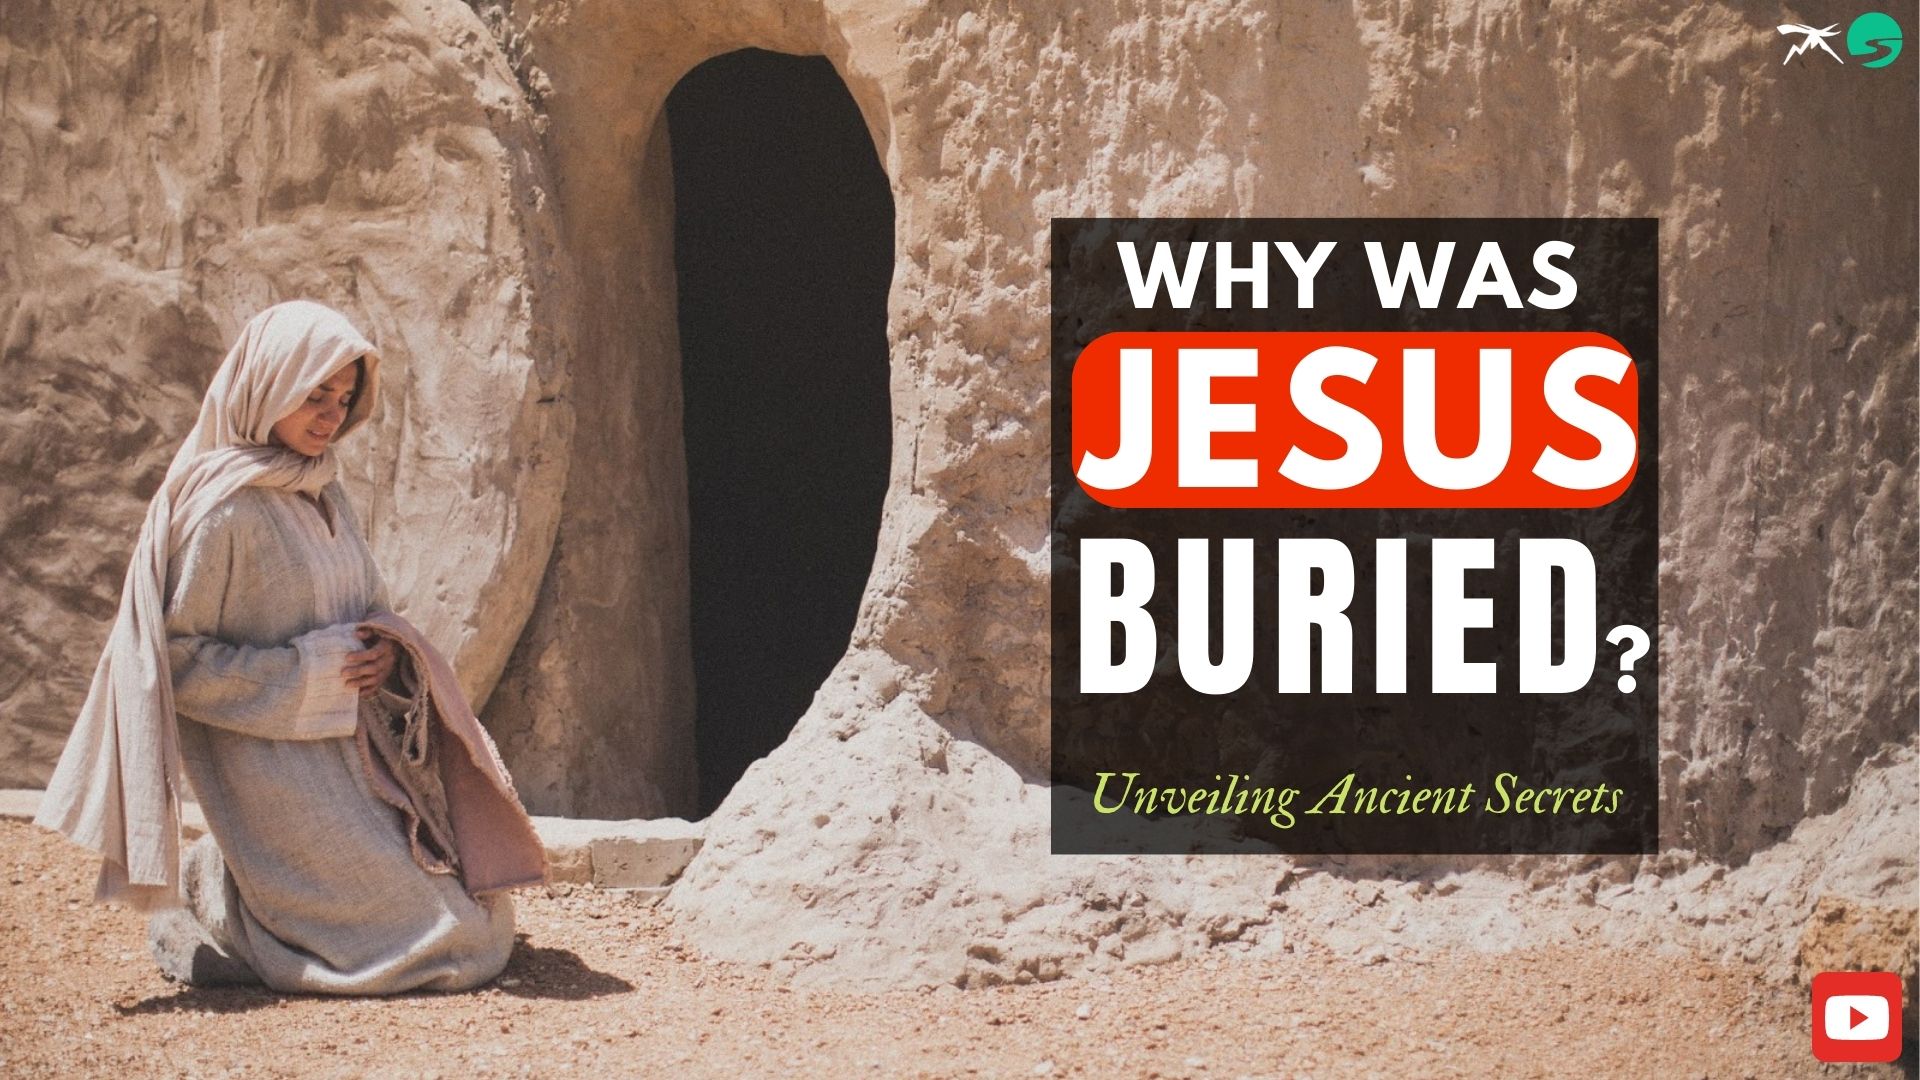 The Secret of The Burial of Jesus Finally FOUND OUT - Why Was Jesus Buried After His Crucifixion?